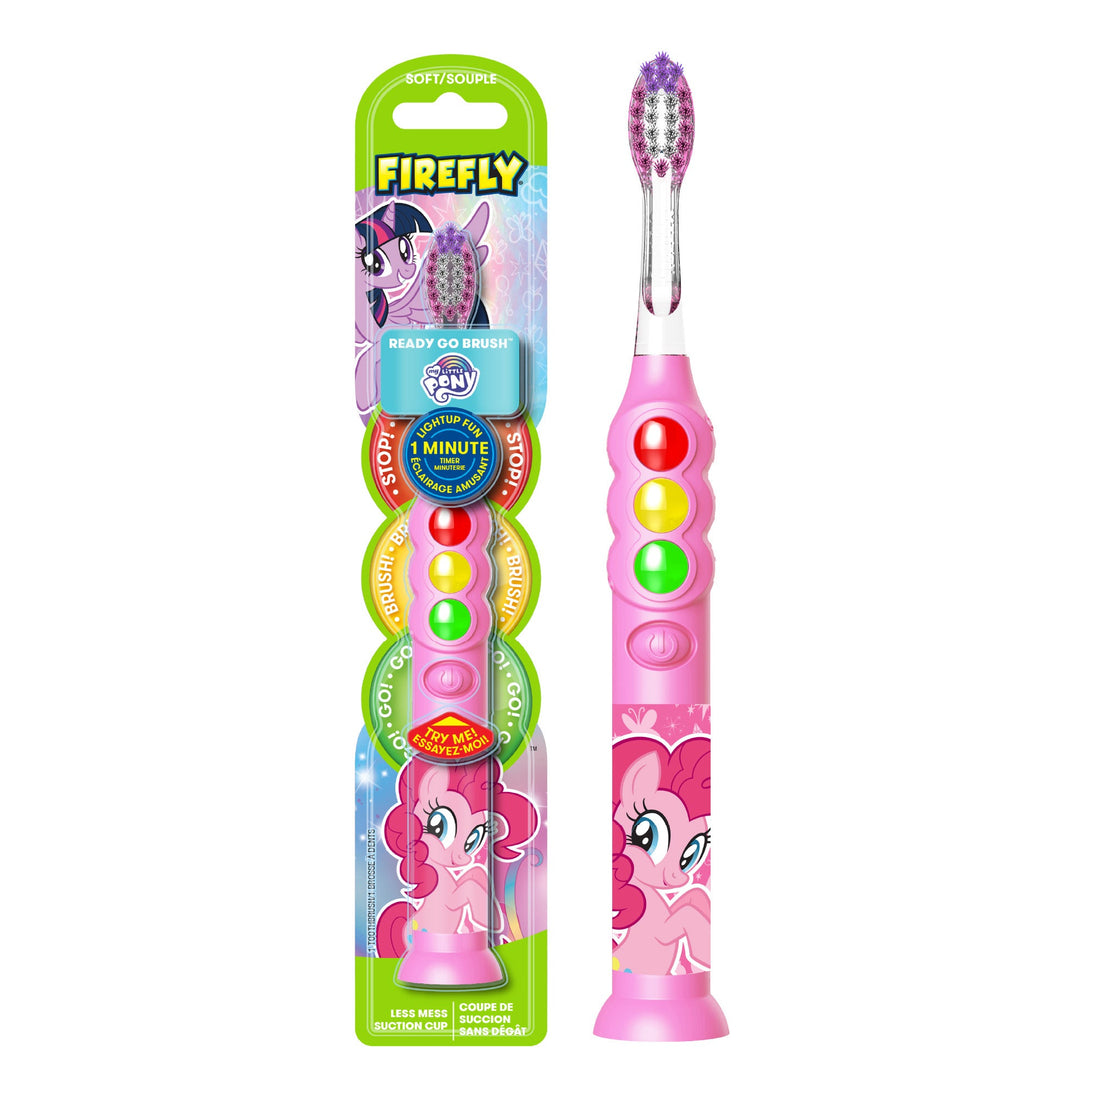 Firefly Ready Go My Little Pony Light Up Timer Toothbrush, 1 Count